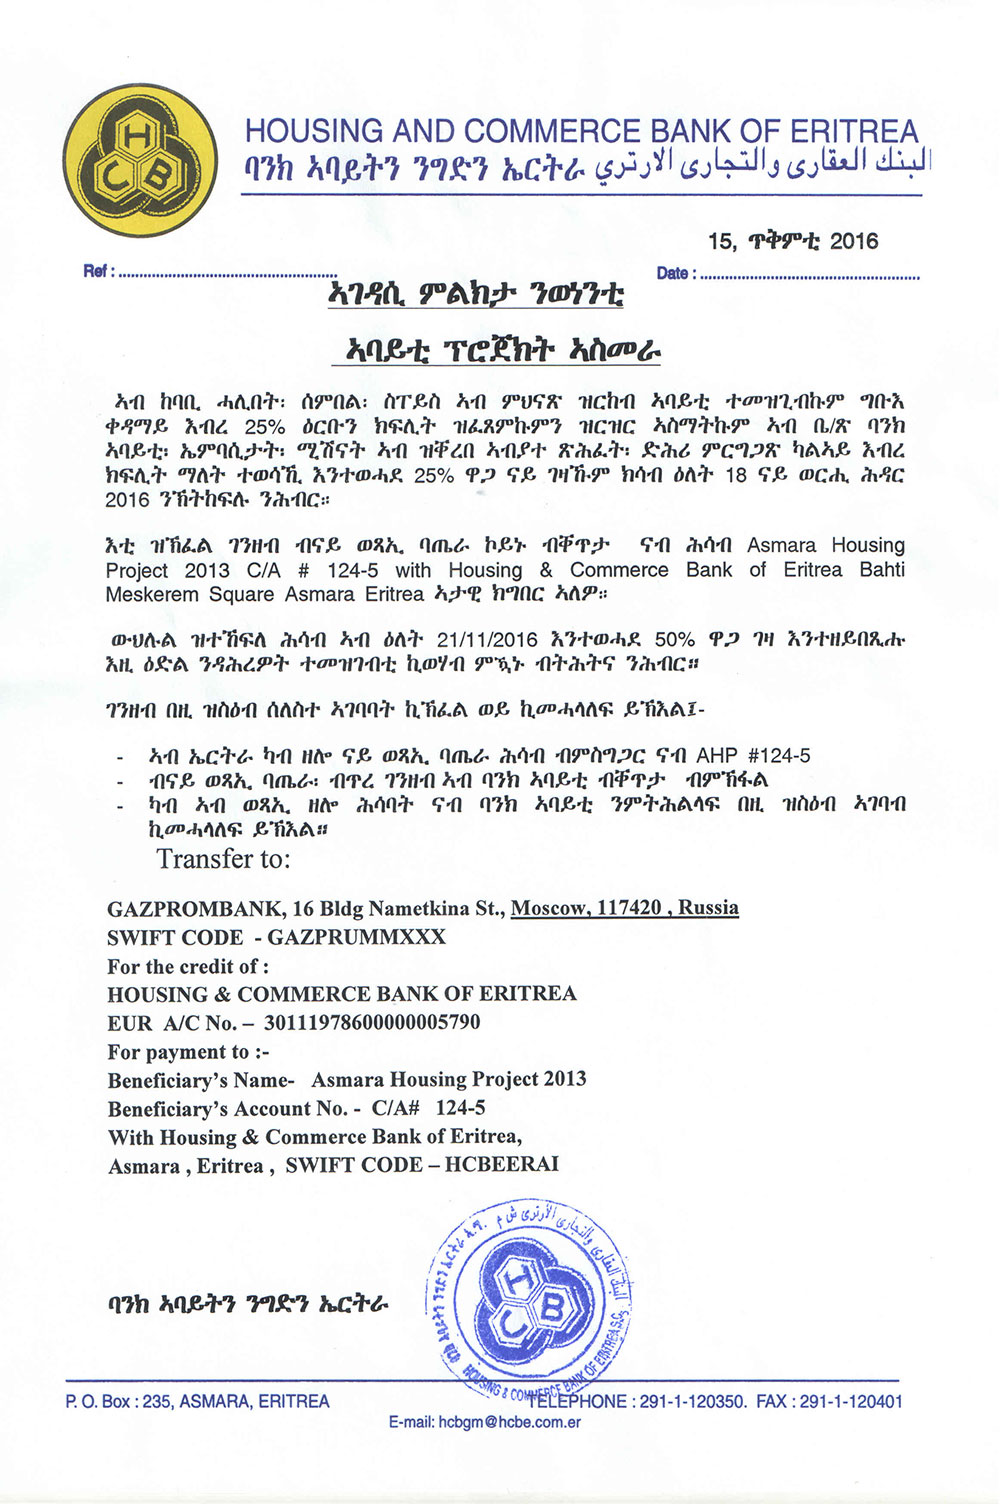 Dehai News Mailing List Archive Housing And Commerce Bank Of Eritrea As Aœˆa Aˆ Aˆ Aˆ Asa As A ˆas As A As A A A A Aˆ Aœ Asa µ As Aˆµaˆ Aˆ